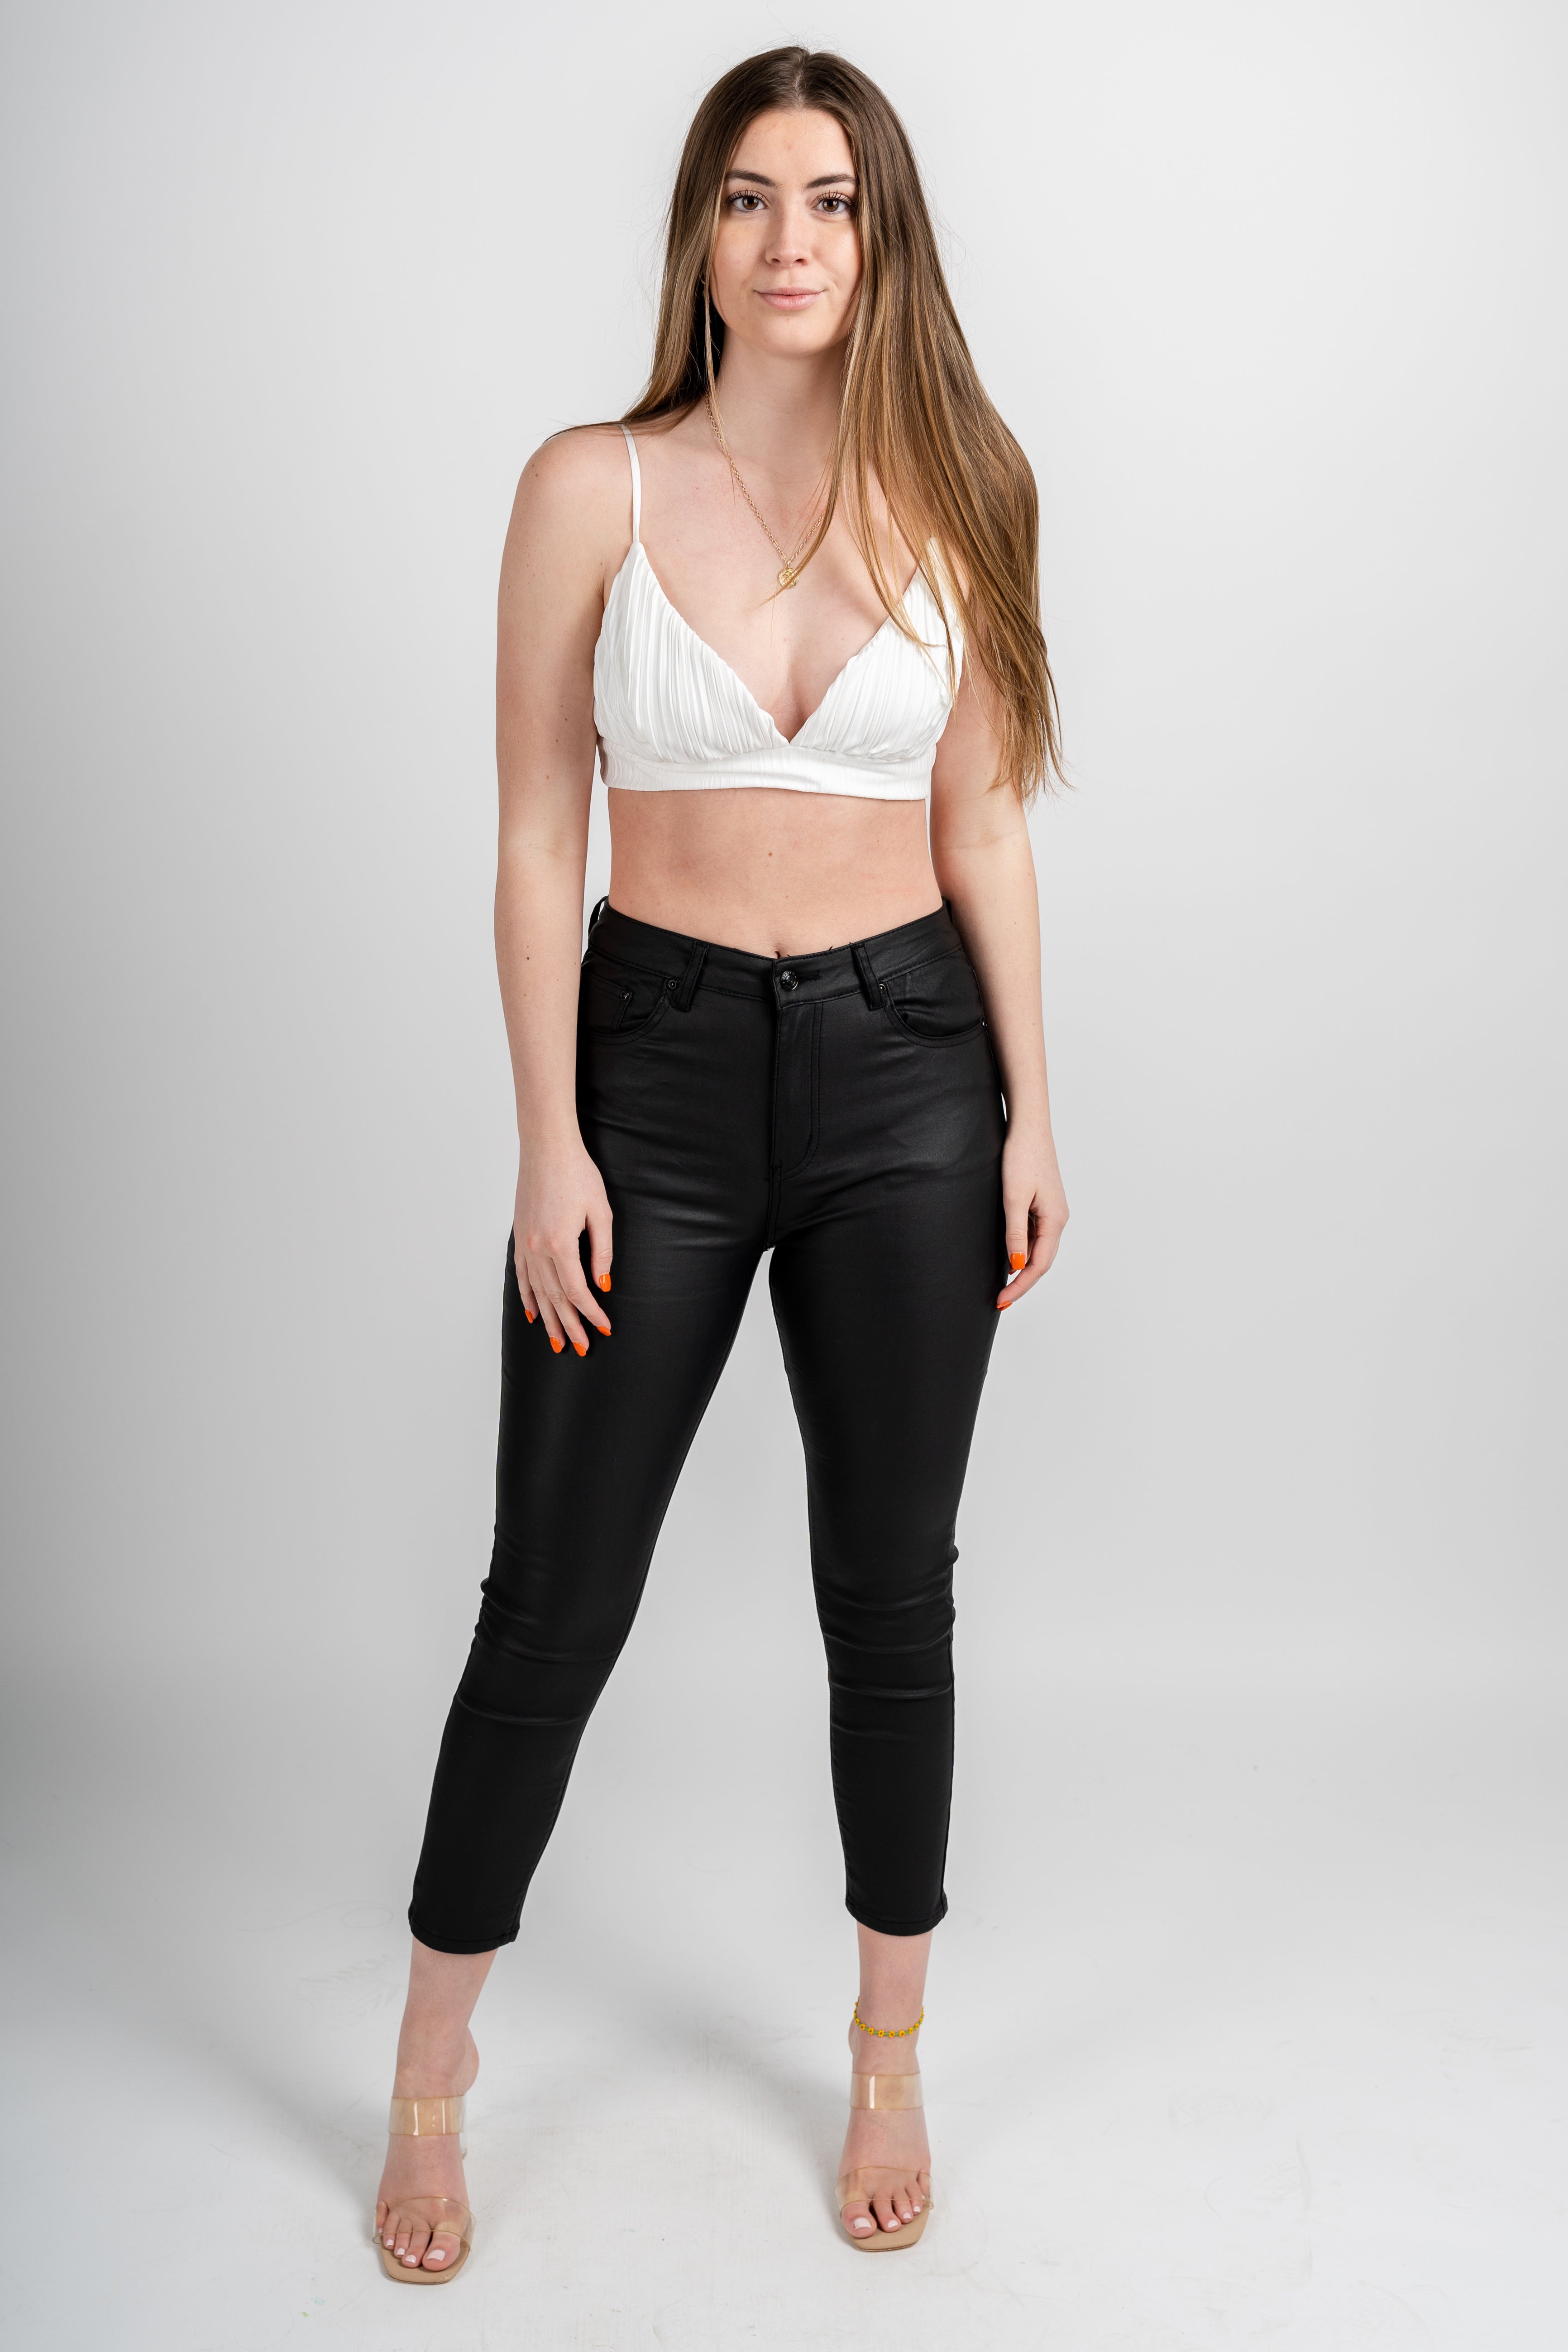 Pleated bralette top off white - Trendy Top - Fashion Bras and Bralettes at Lush Fashion Lounge Boutique in Oklahoma City